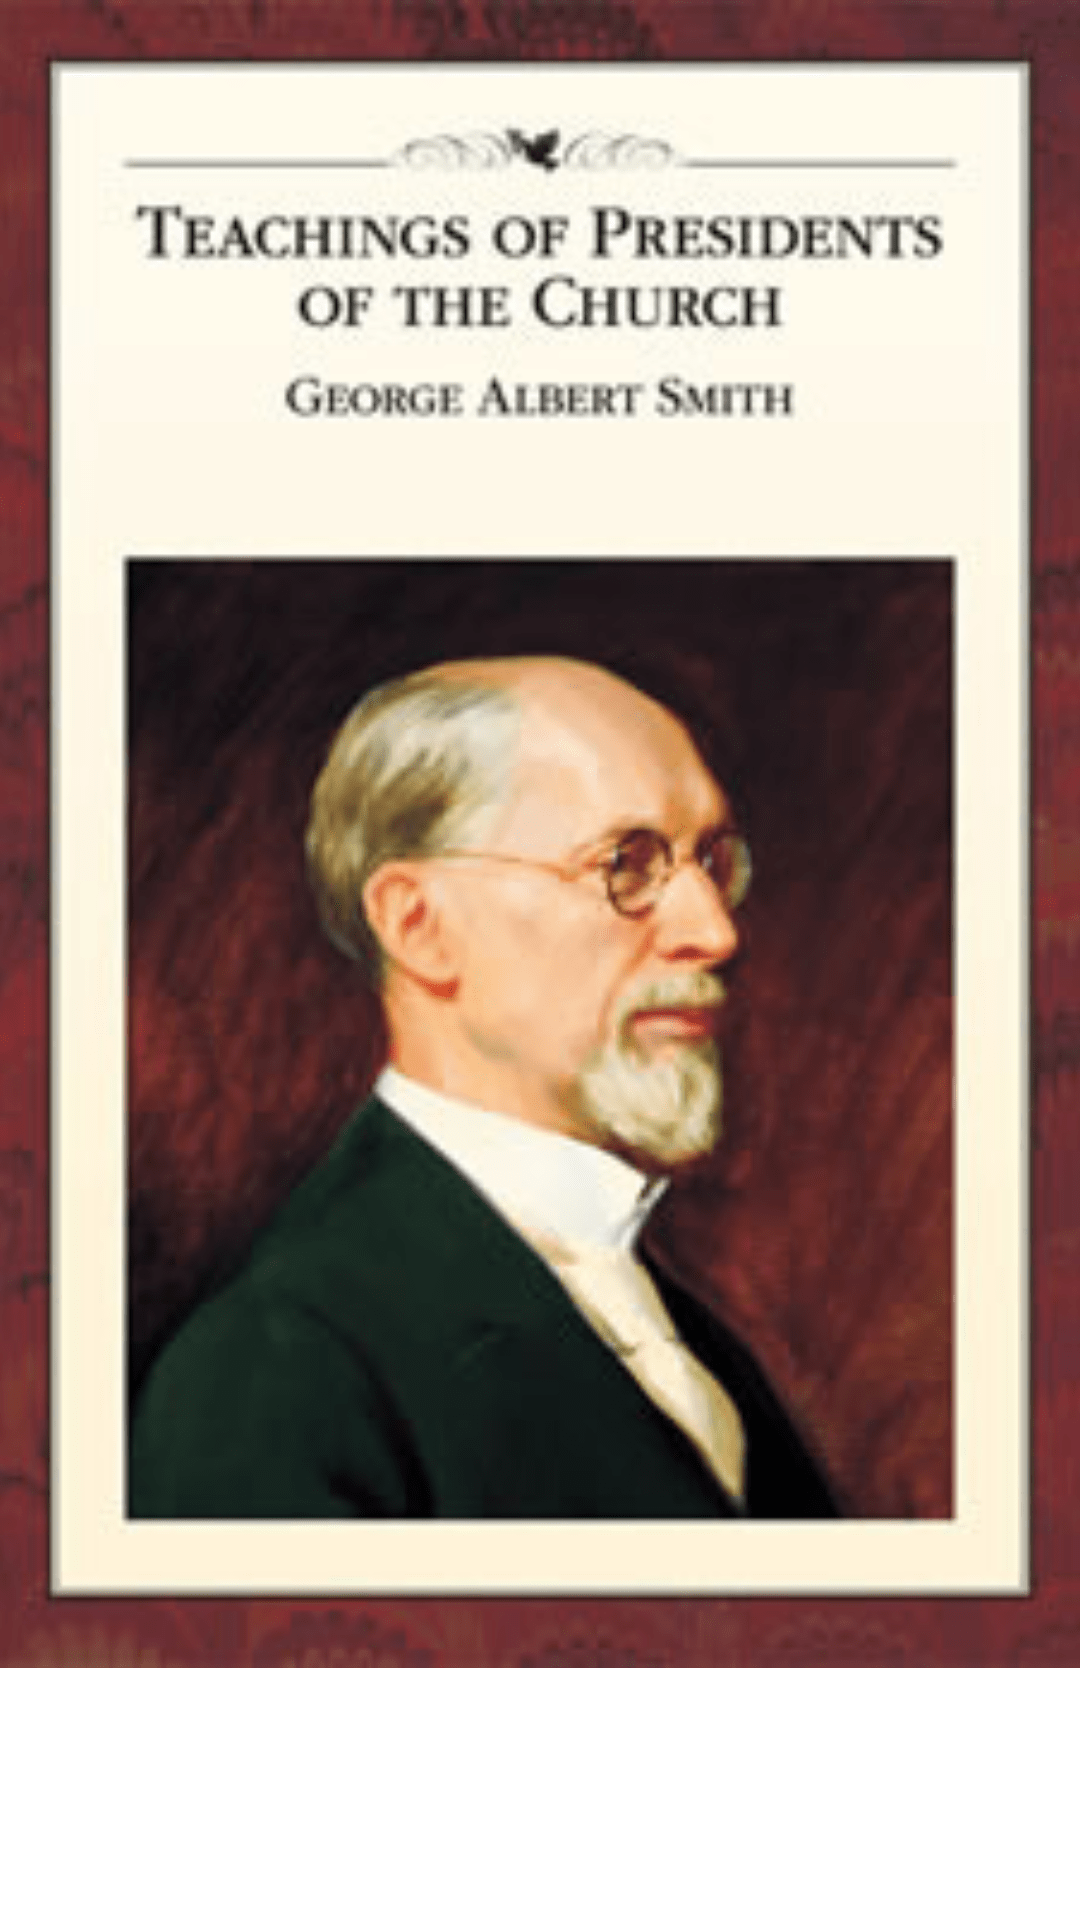 Teachings of Presidents of the Church: George Albert Smith